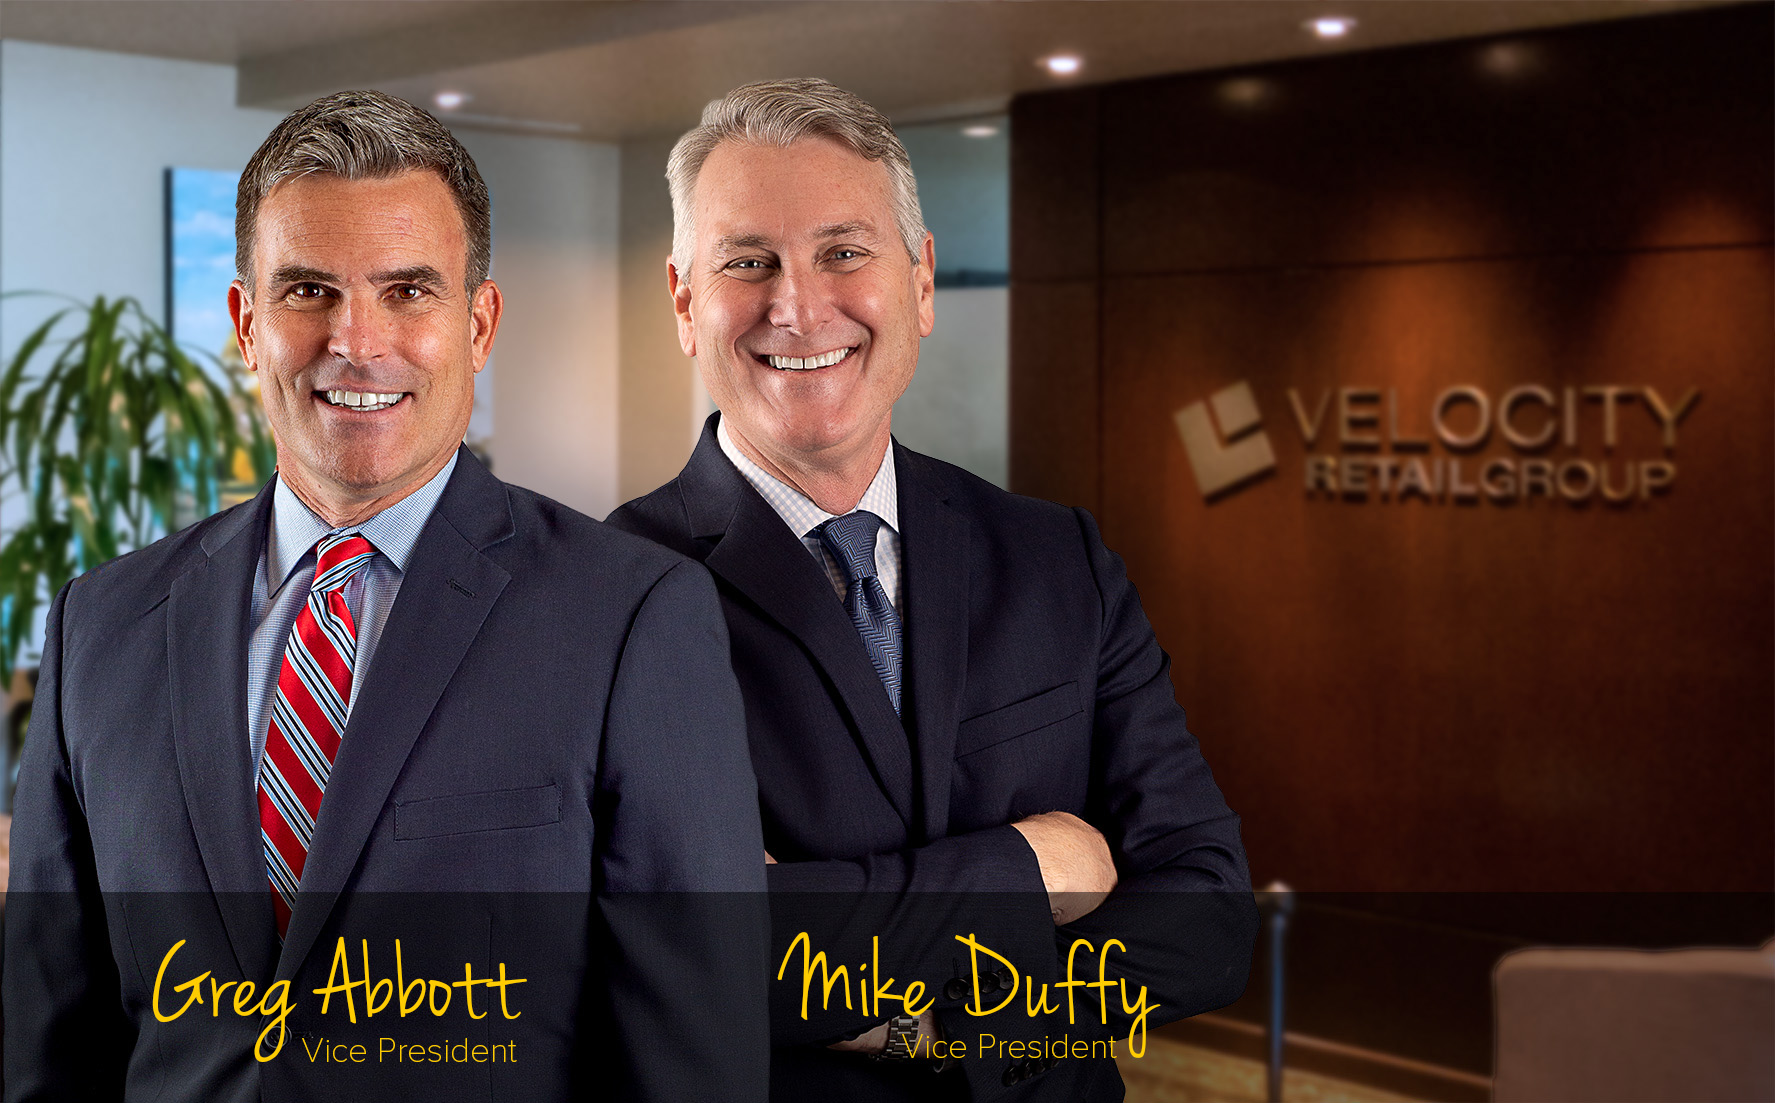 Experienced Investment Team Joins Velocity Retail Group 3